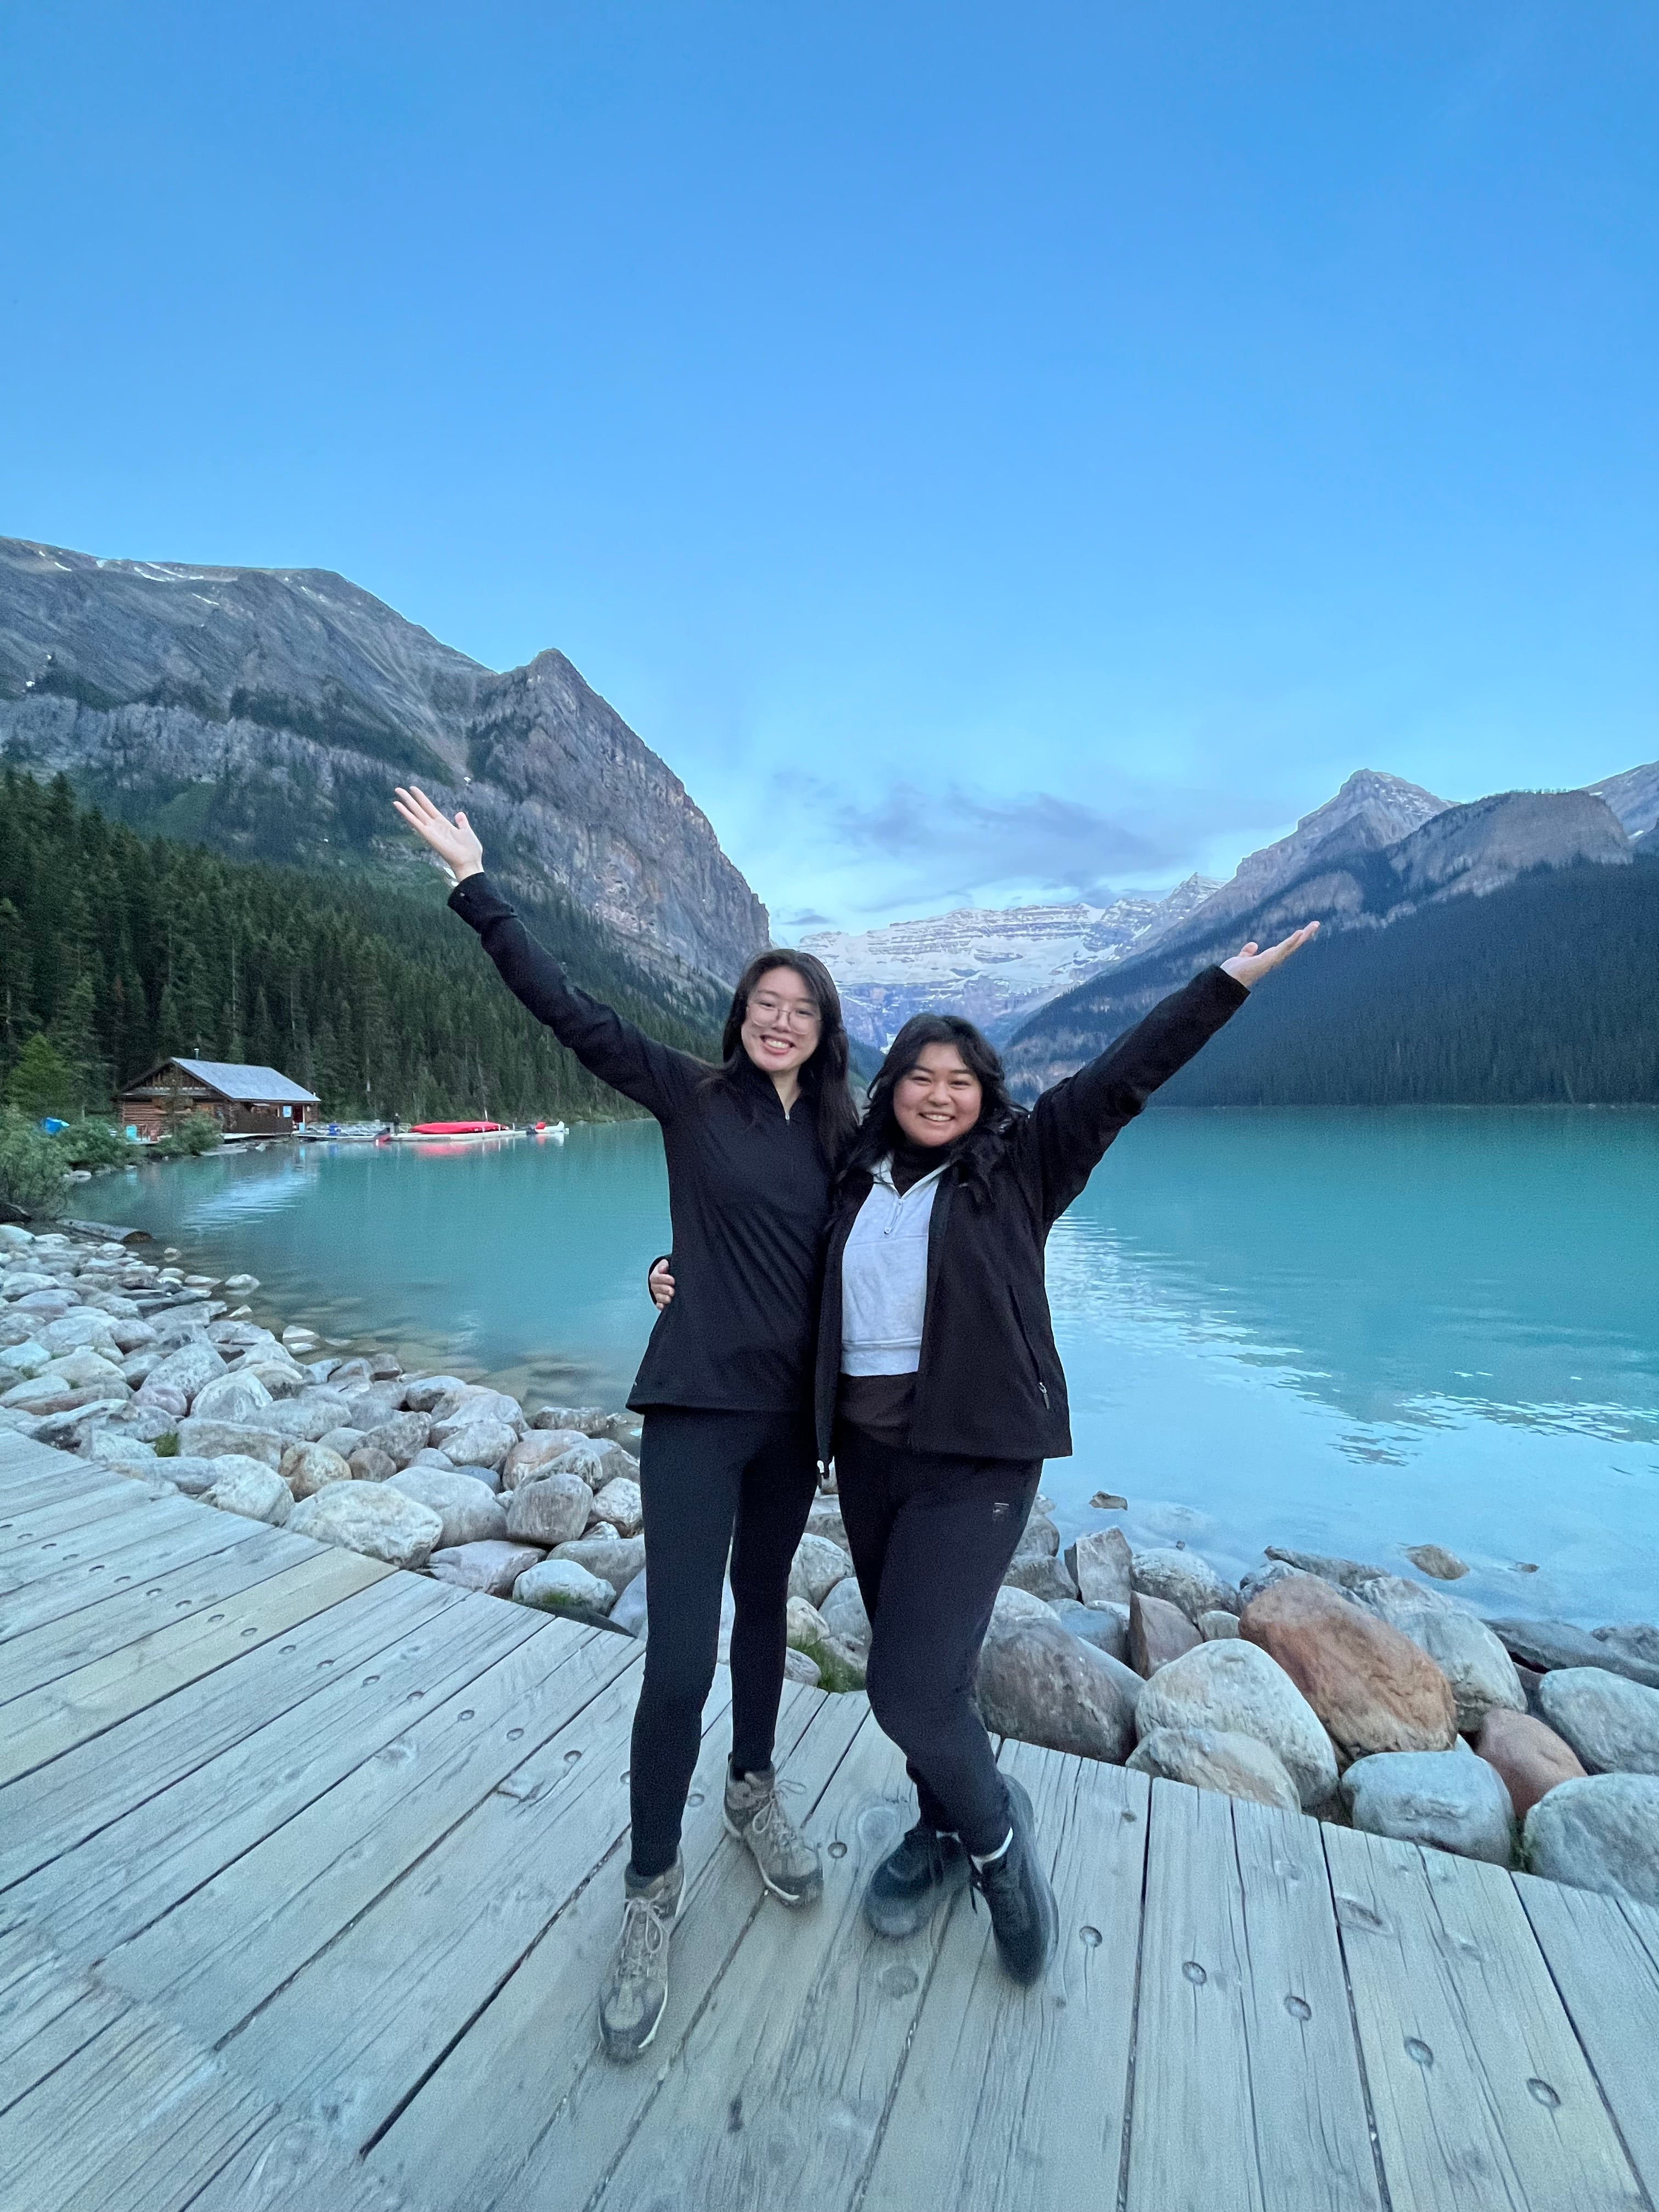 Two women in front of mountains in Alberta